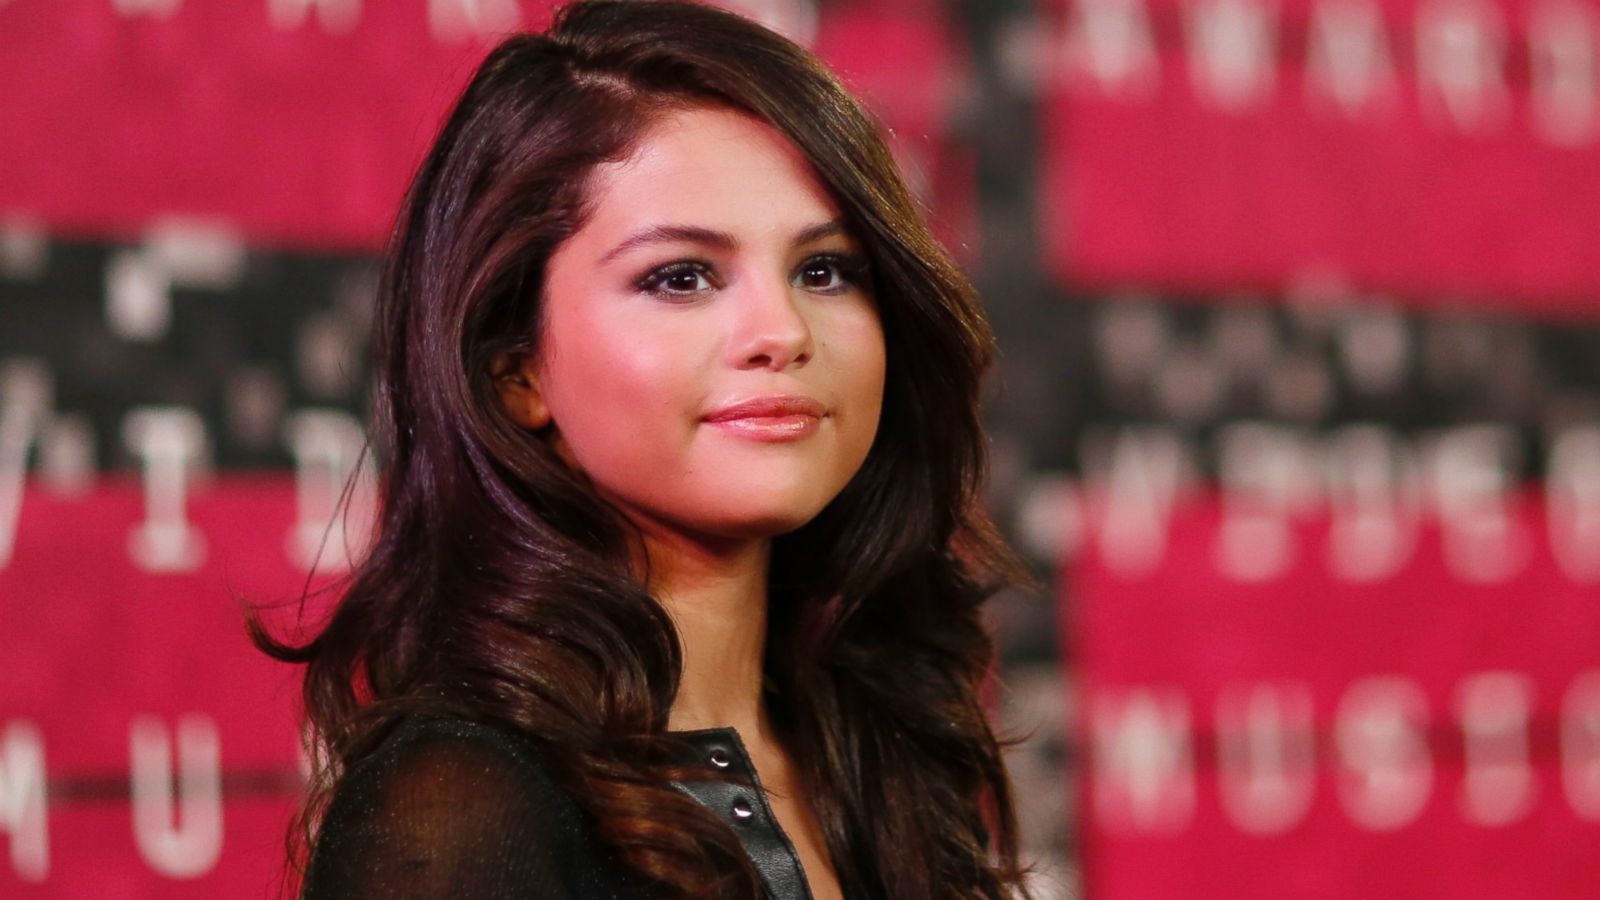 Selena Gomez Opens Up About Lupus Diagnosis, Chemotherapy - ABC News